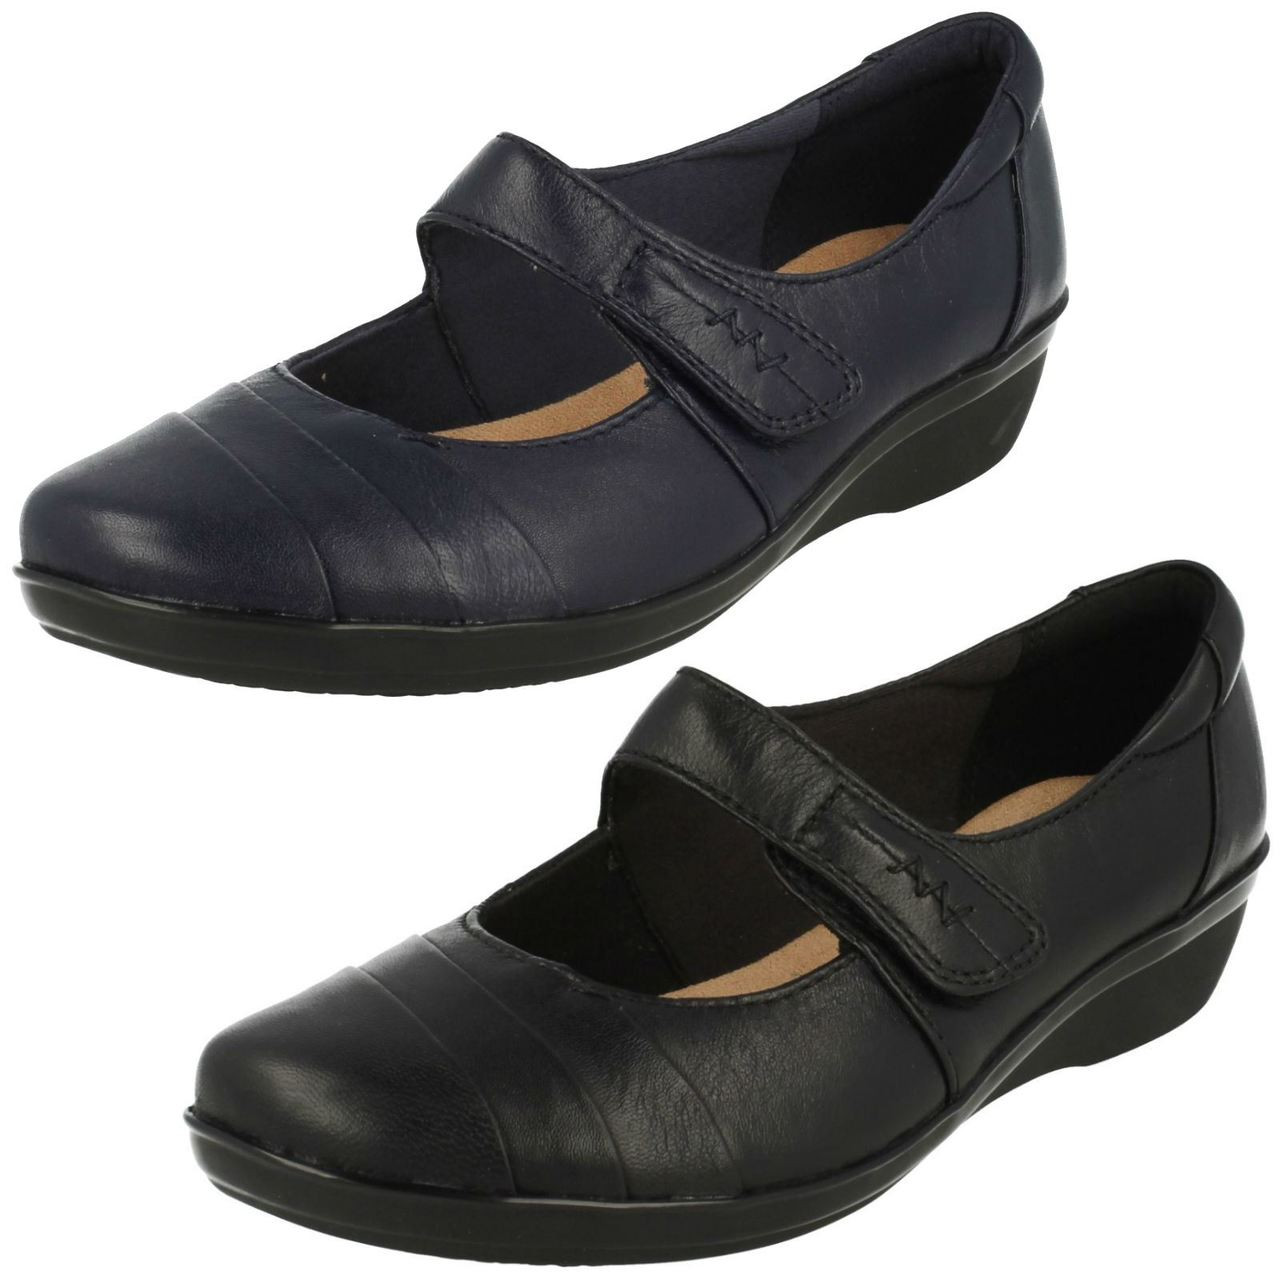 Clarks Violet55 Ankle Strap Leather Low Heeled Shoes With Trim - Black |  very.co.uk